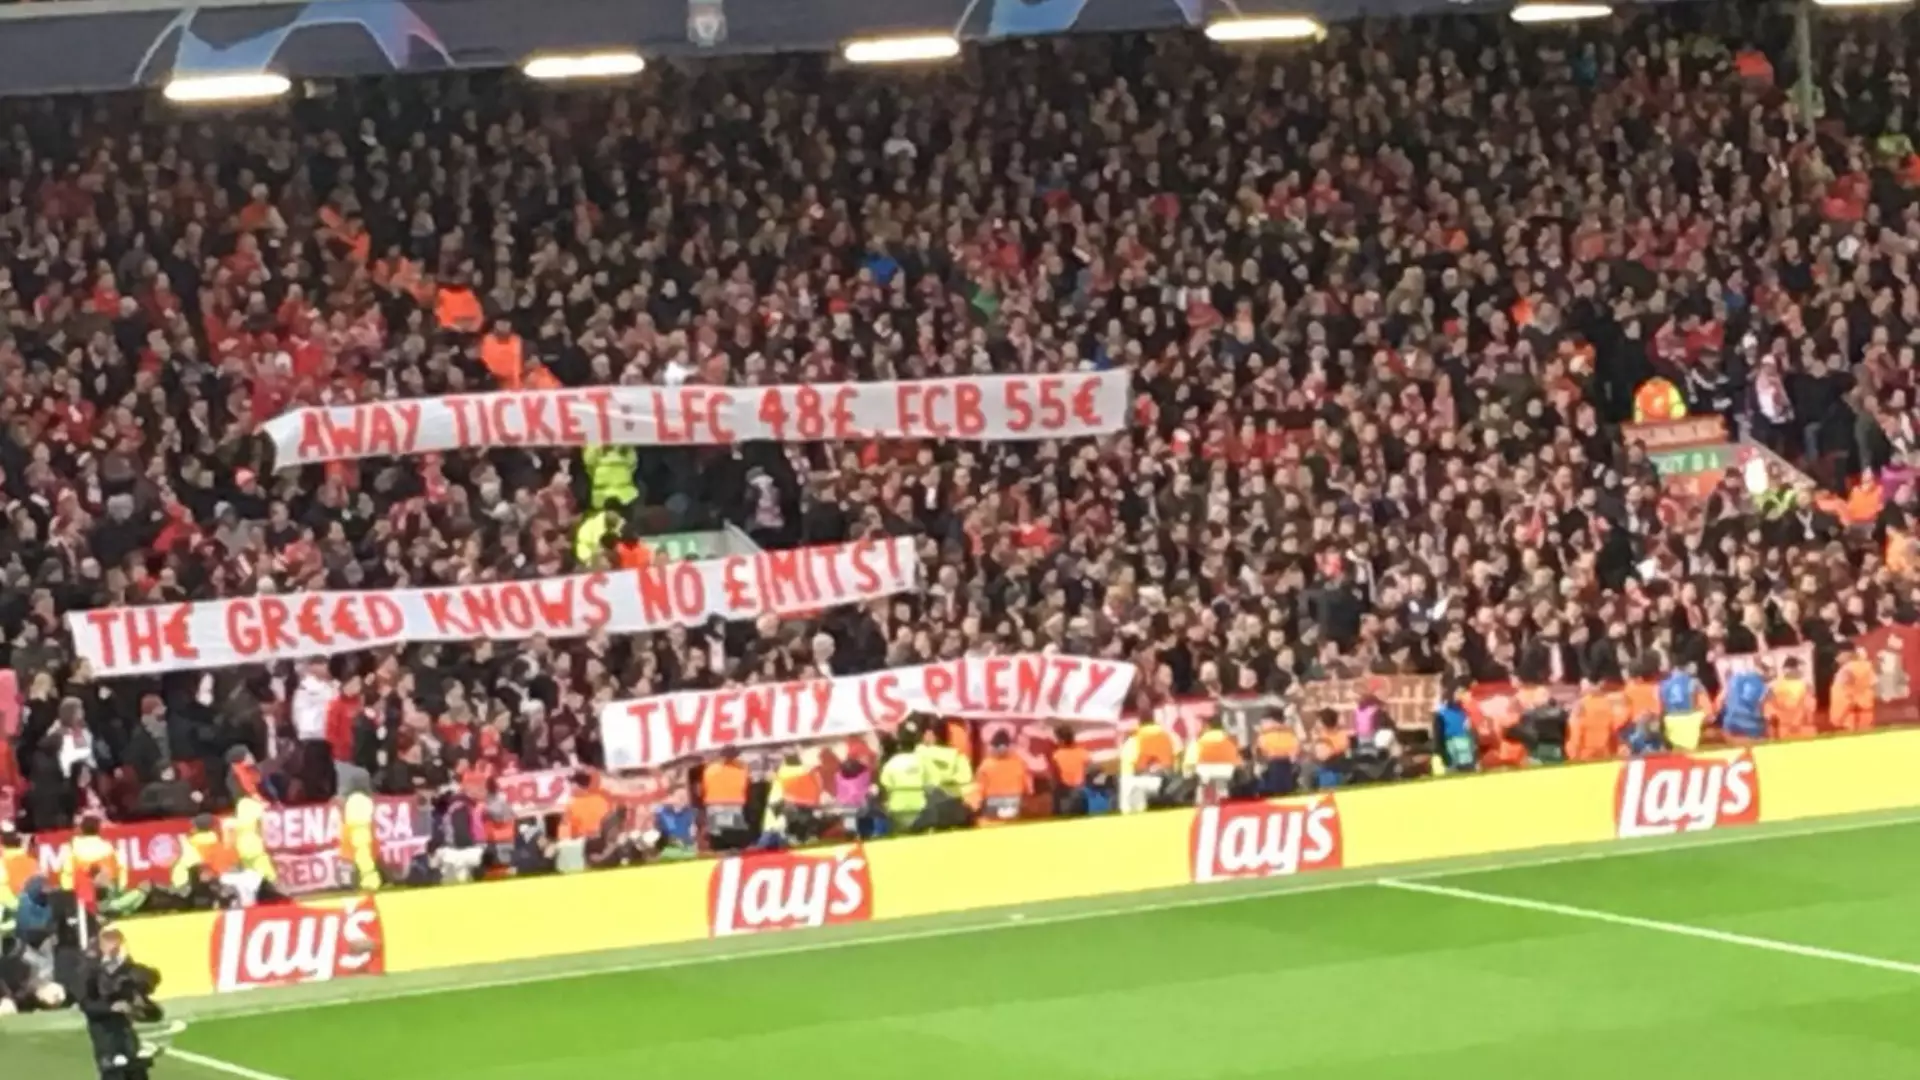 Liverpool Supporters Applaud Bayern Munich Fans For Supporting The ‘Twenty’s Plenty’ Campaign